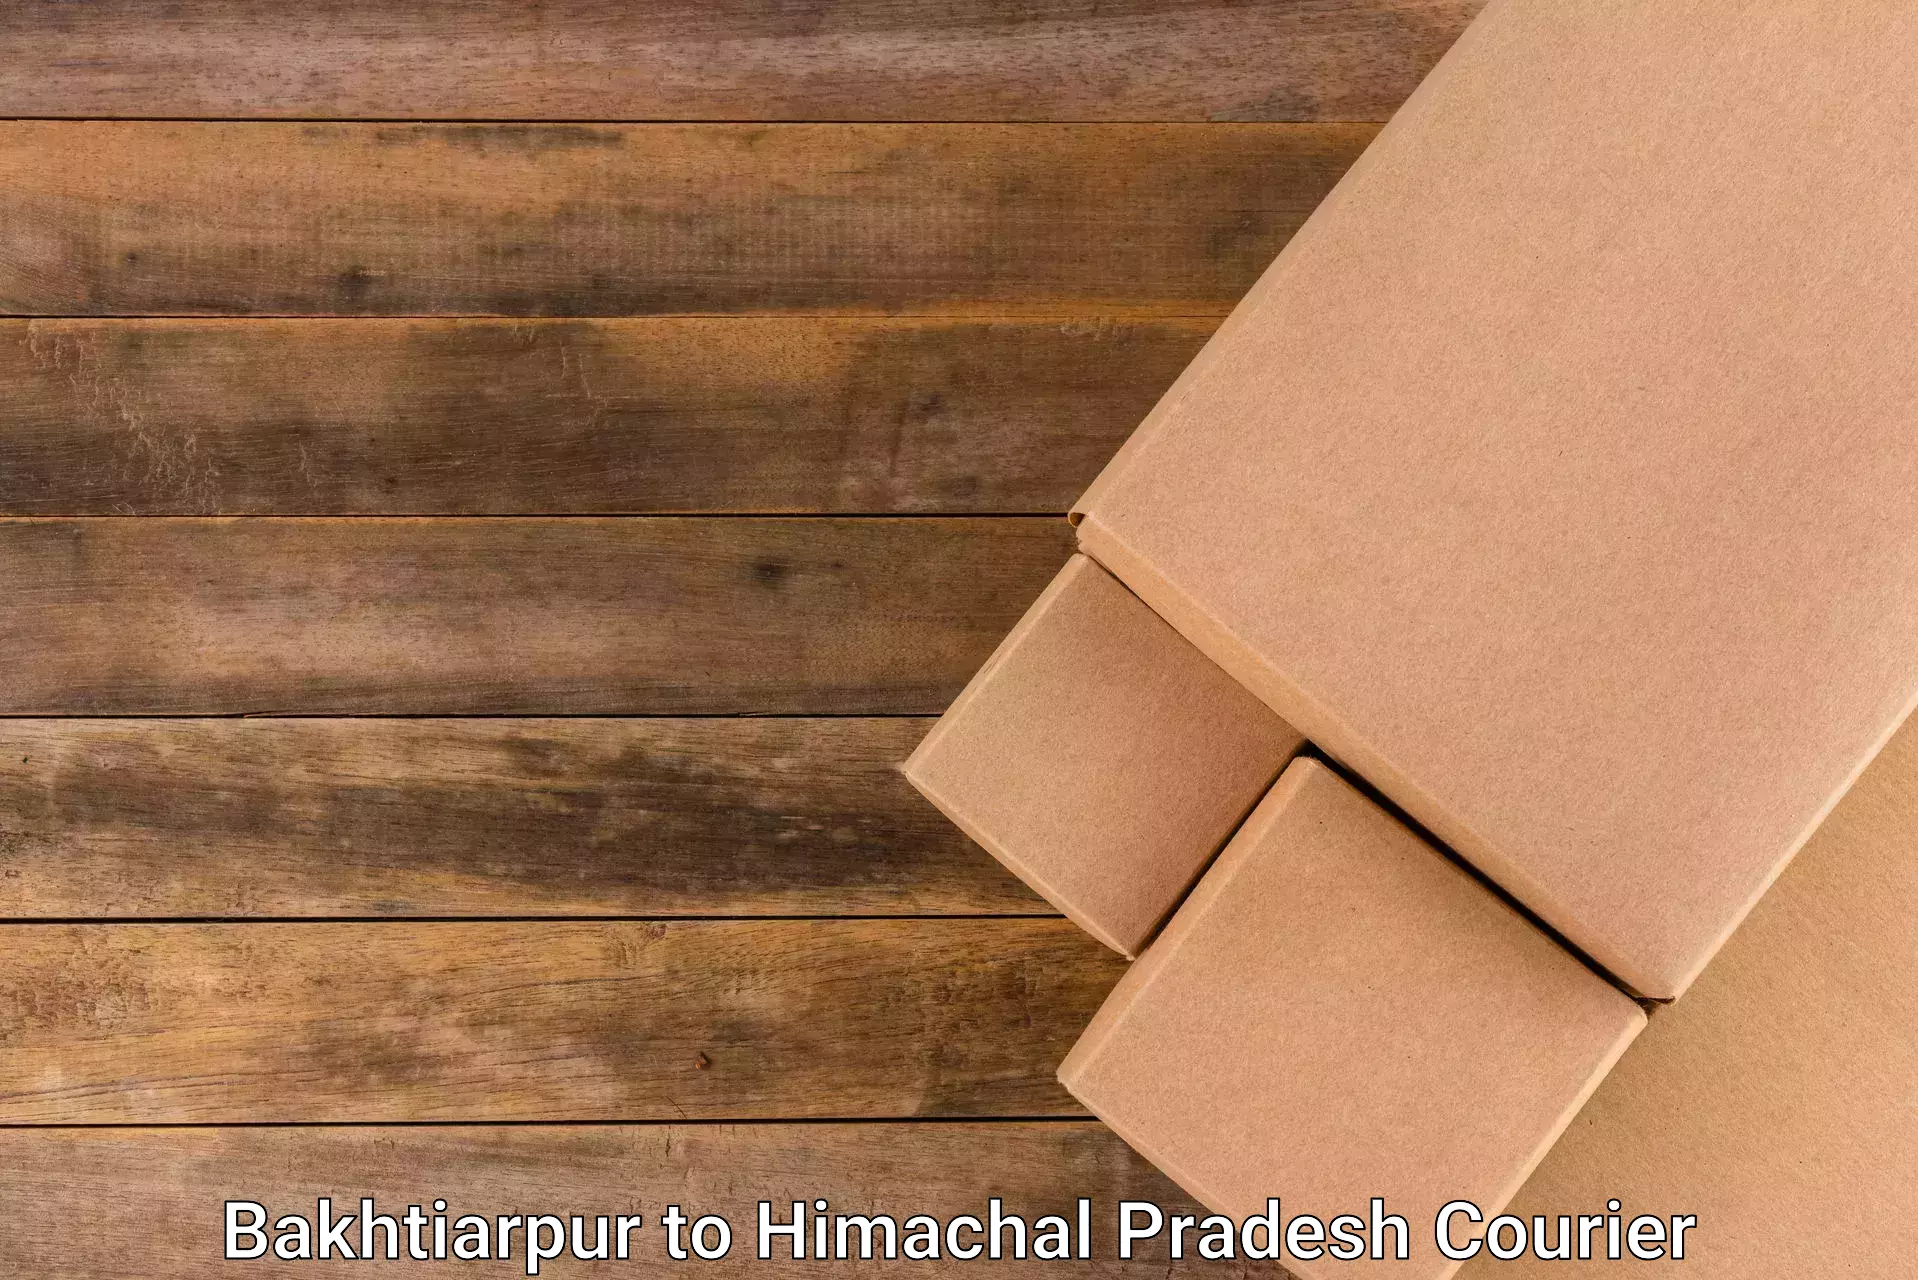 Automated parcel services Bakhtiarpur to Dheera